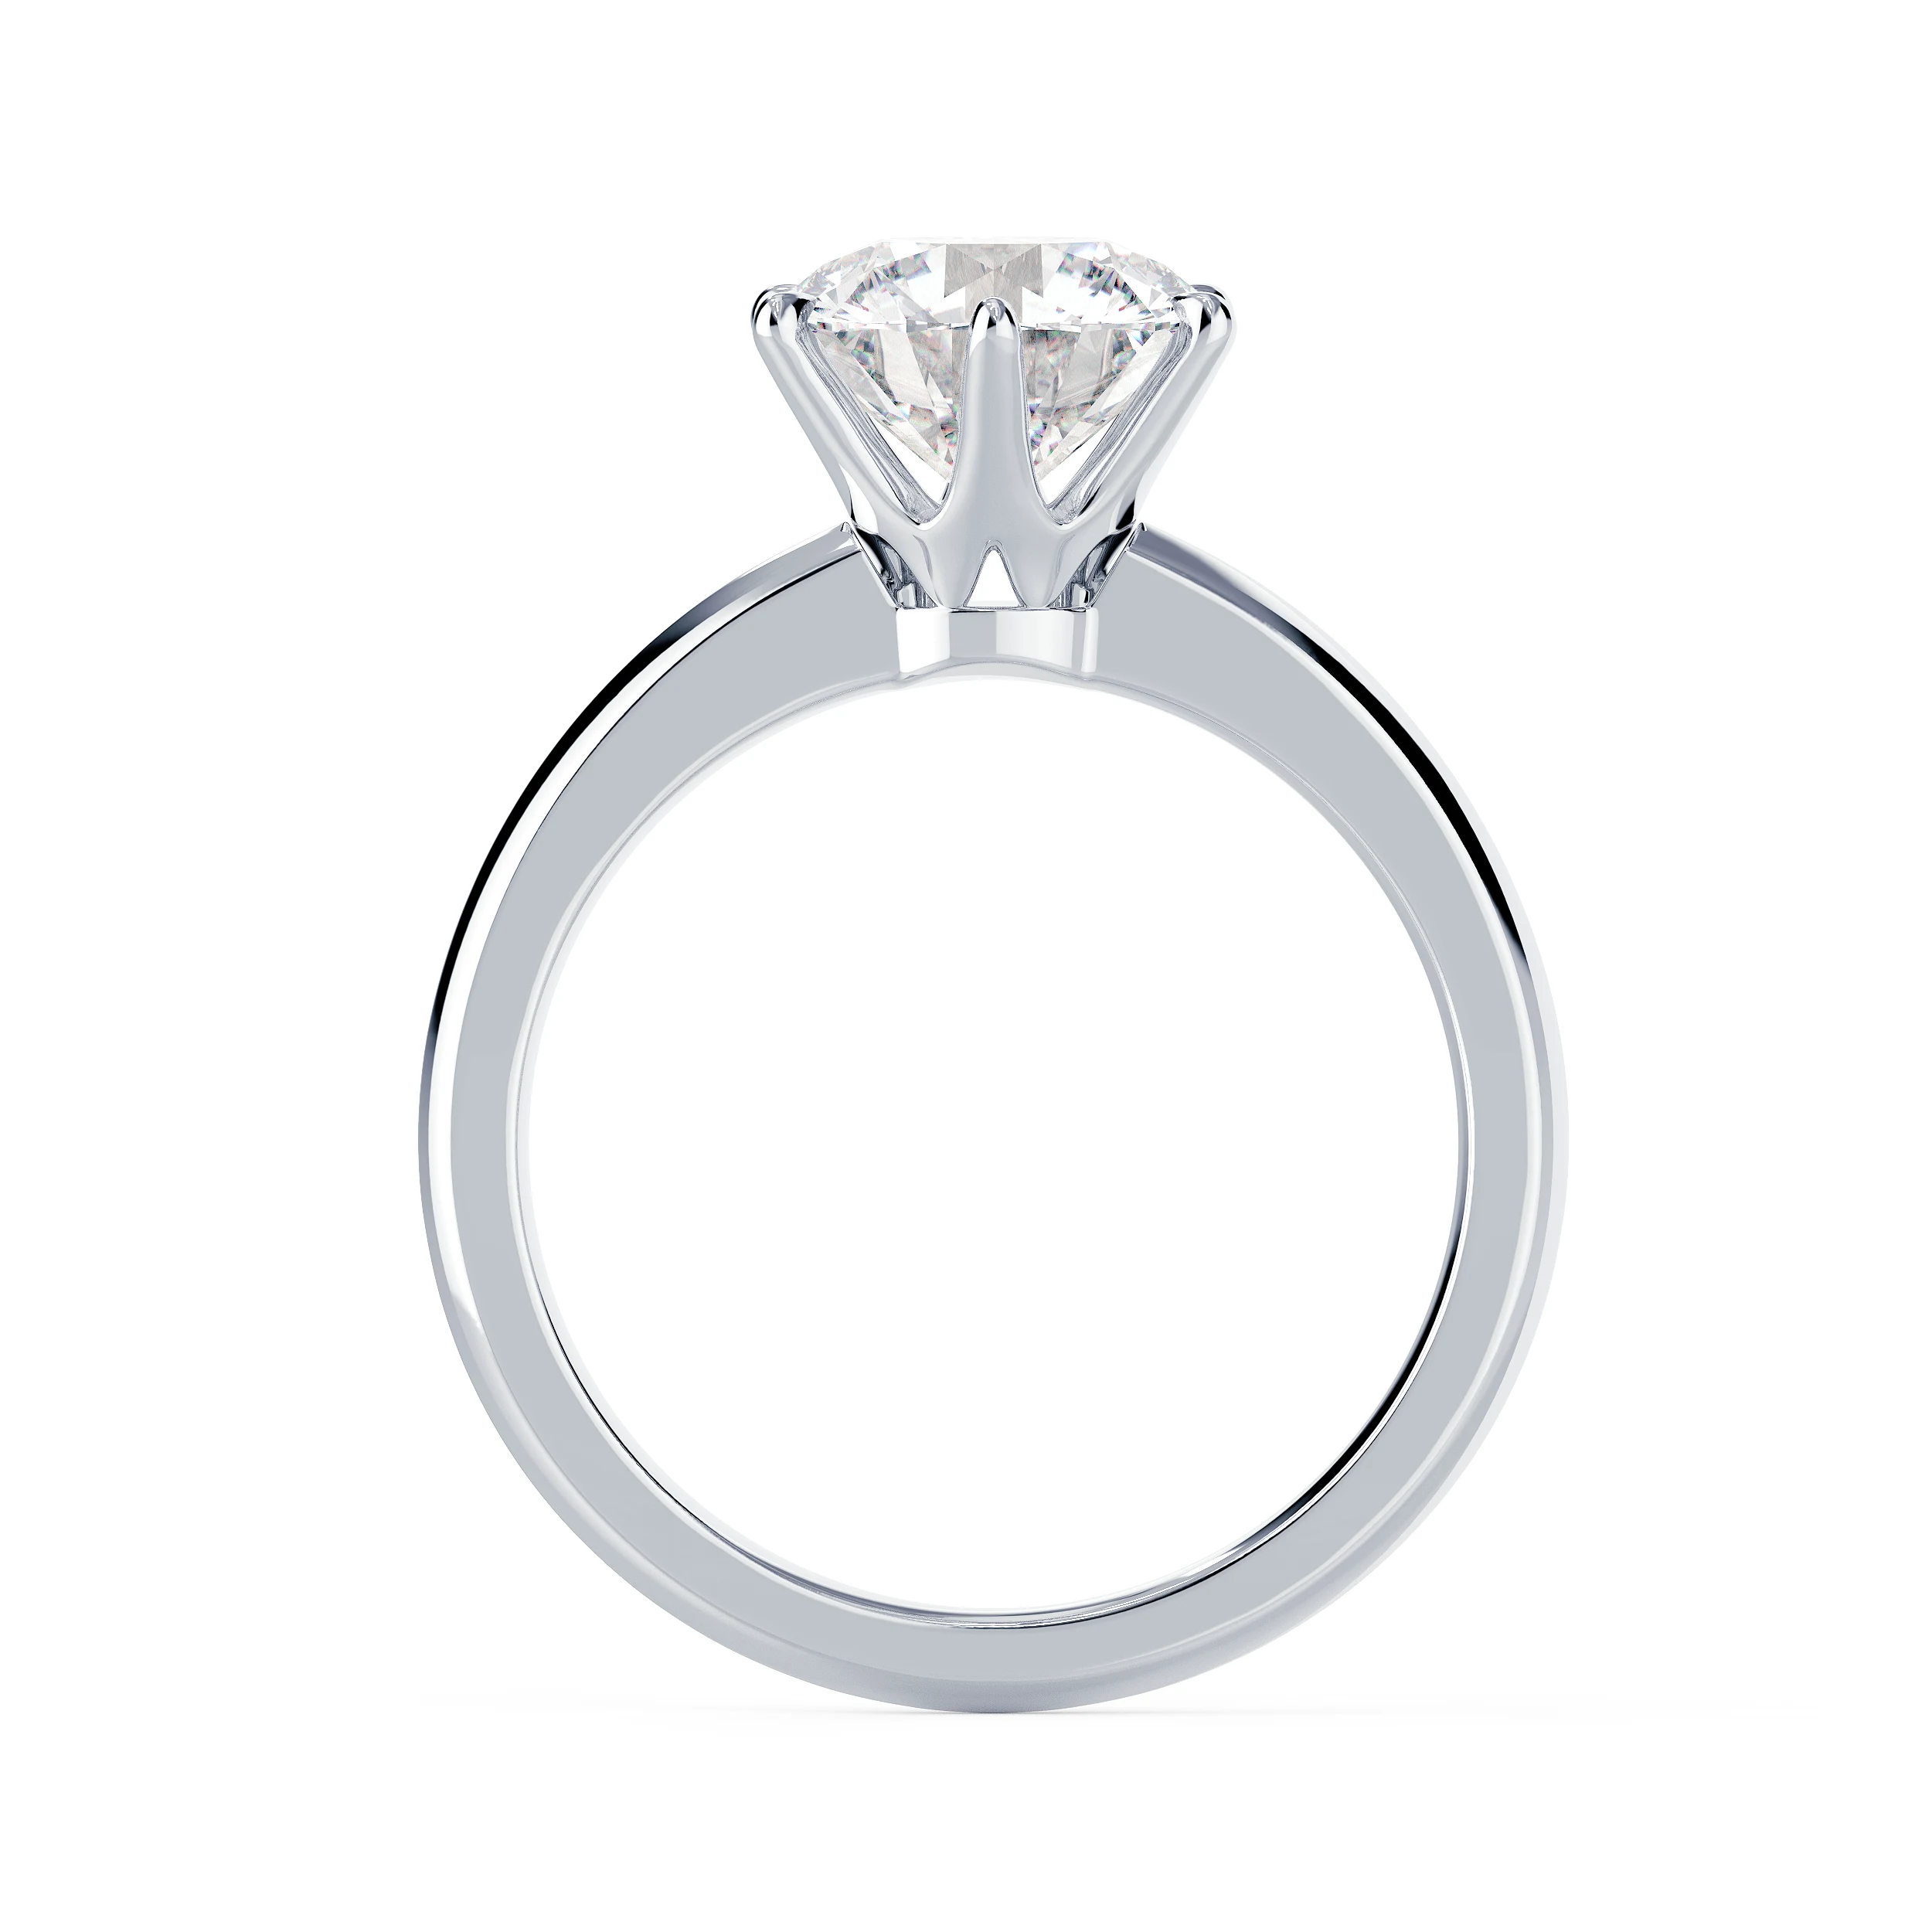 Lab Diamonds Round Classic Six Prong Solitaire Diamond Engagement Ring in White Gold (Profile View)